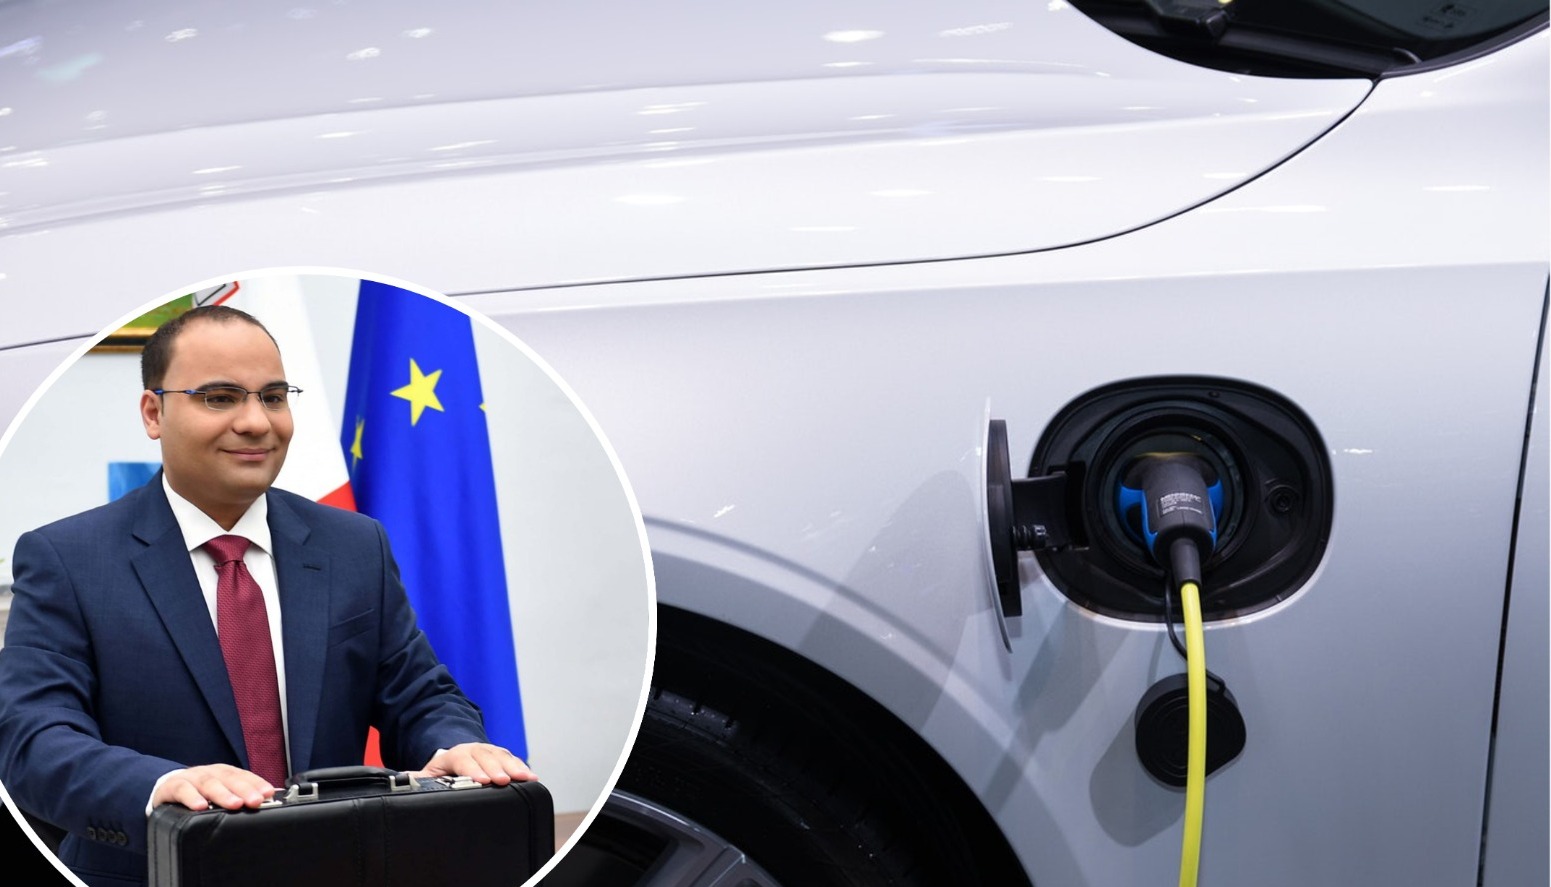 malta-government-grant-for-electric-vehicles-plug-in-hybrids